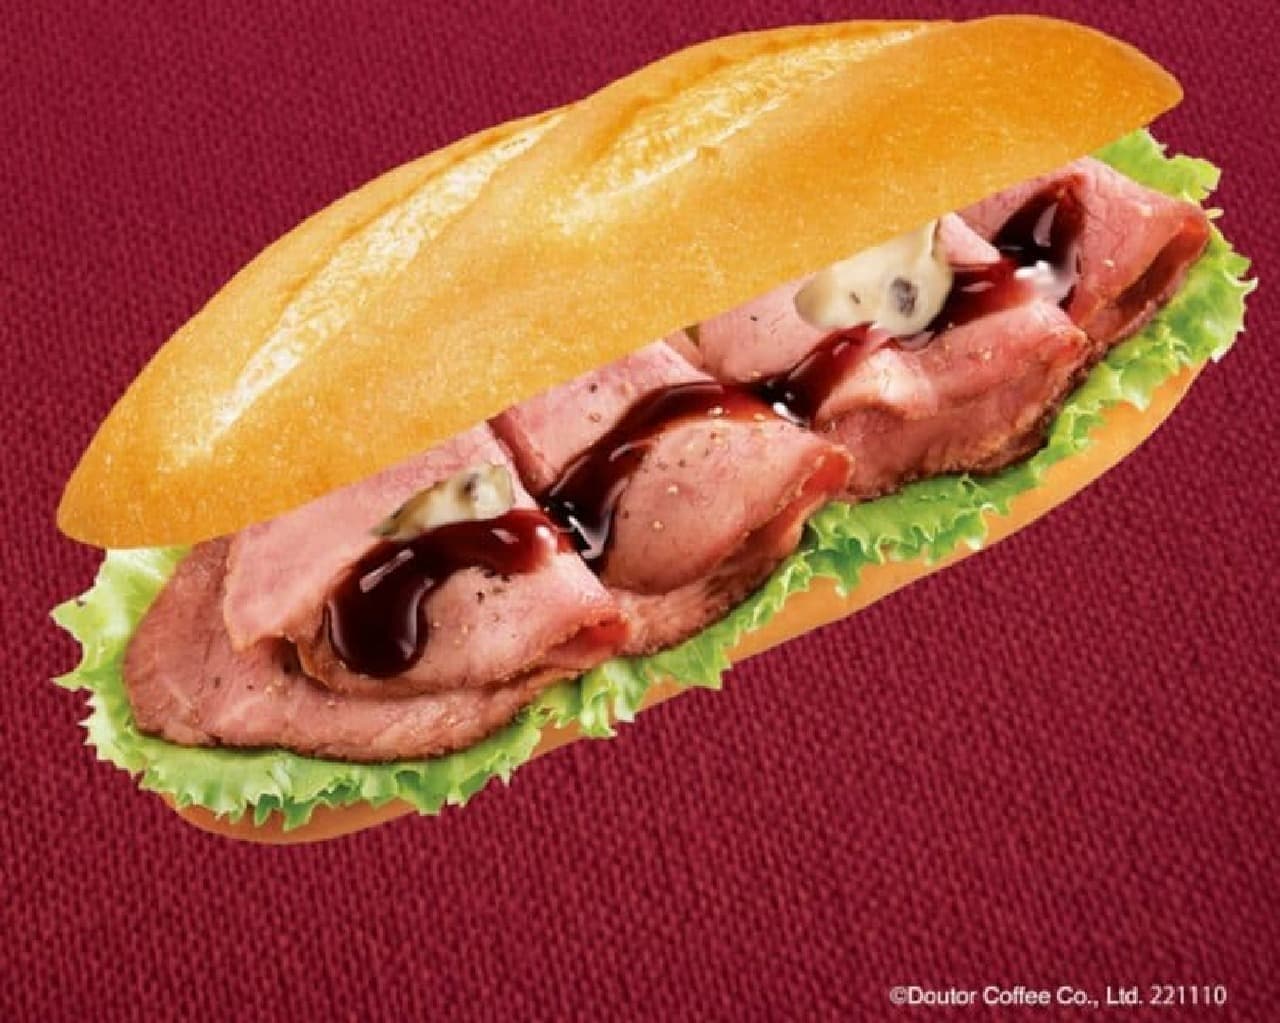 Doutor "Luxury Milano Sandwich - Roast Beef Grilled over Direct Fire with Red Wine Balsamic Vinegar Sauce